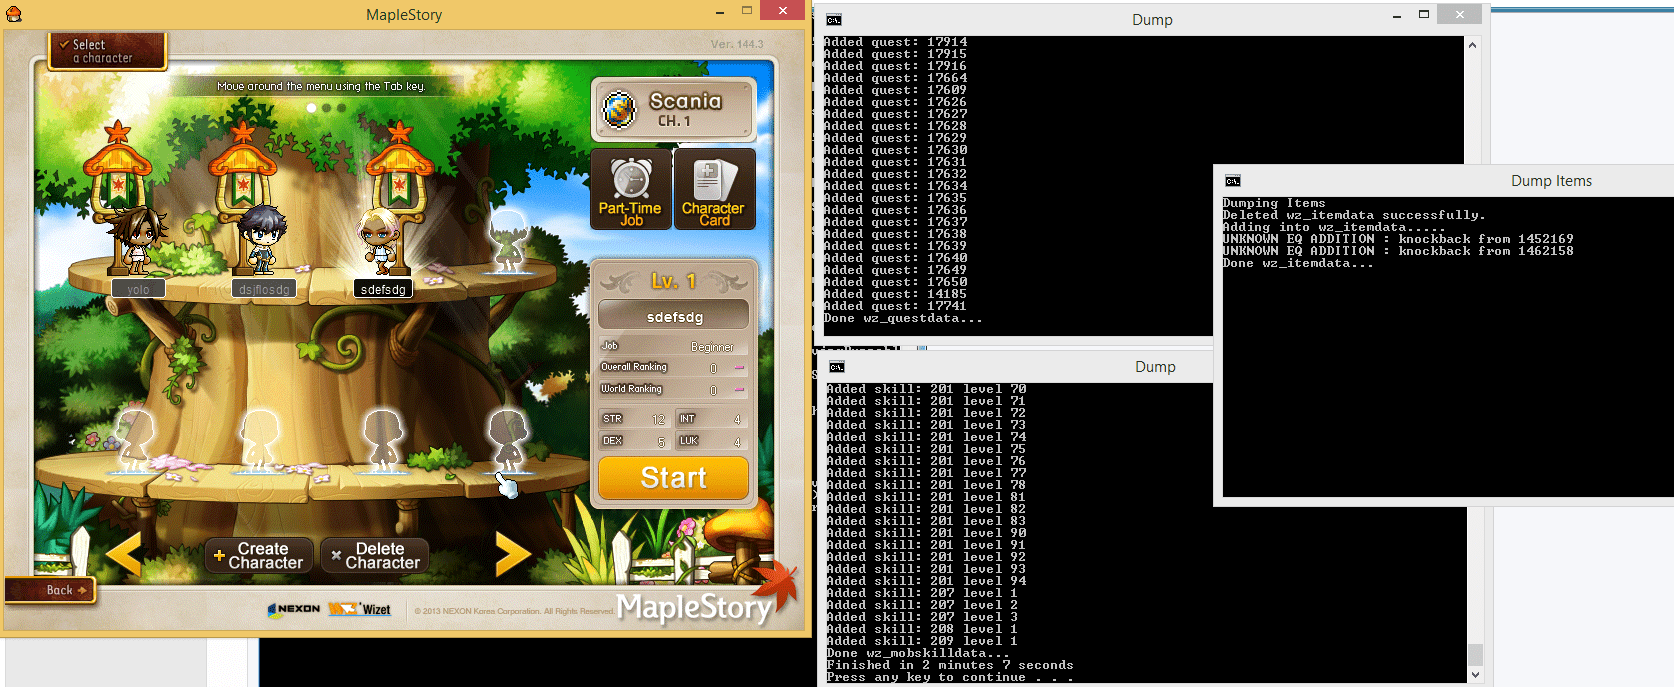 hmLDWOP - [Not for noob] How to setup a v144.3 maplestory private server on --> localhost <-- - RaGEZONE Forums